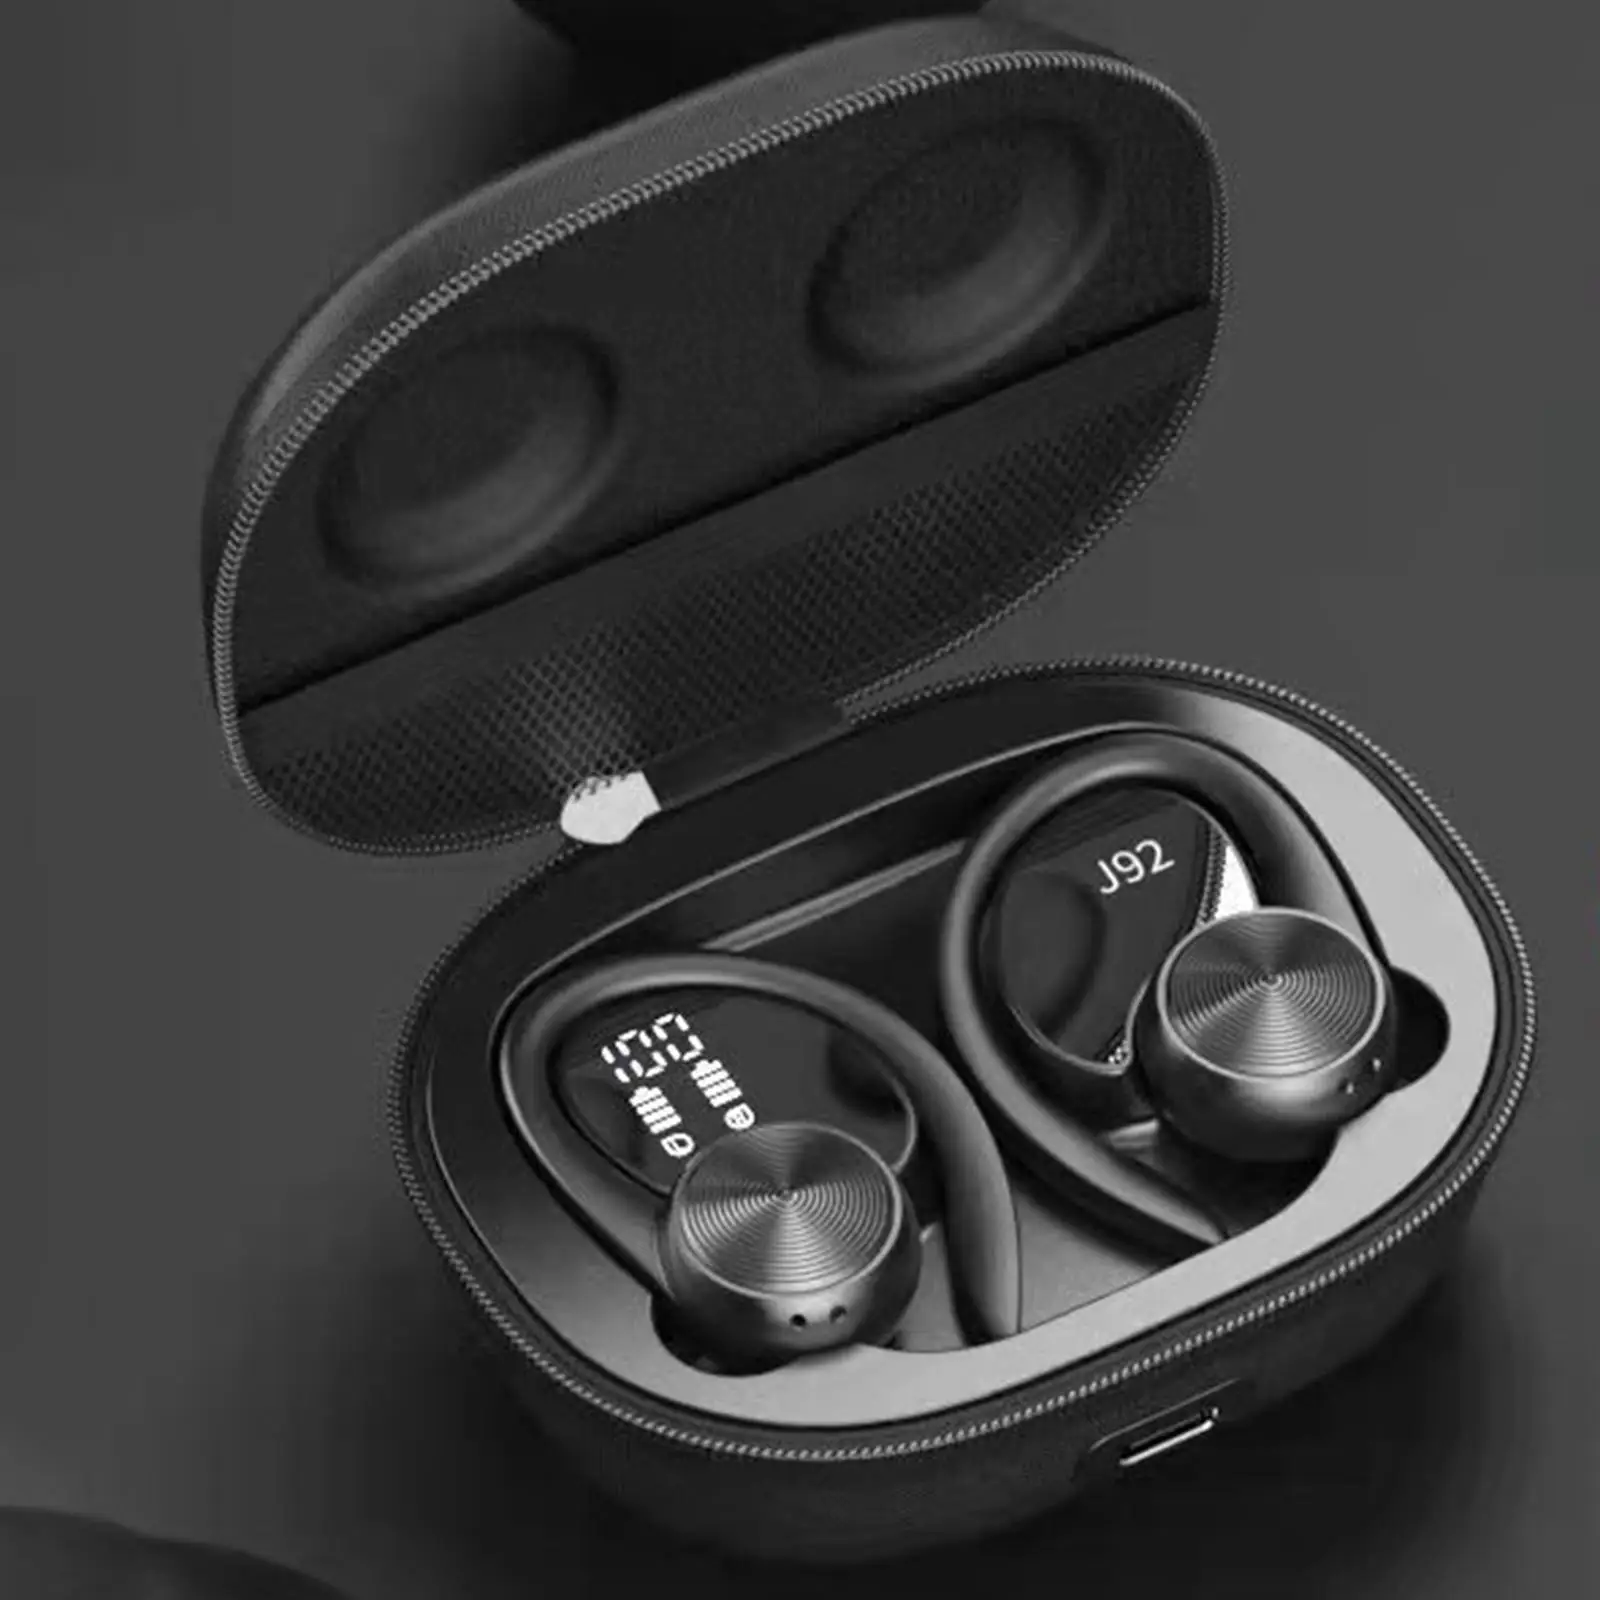 Bluetooth 5.0 Wireless Earbuds with Ear Hooks Clear Call for Sports Gym